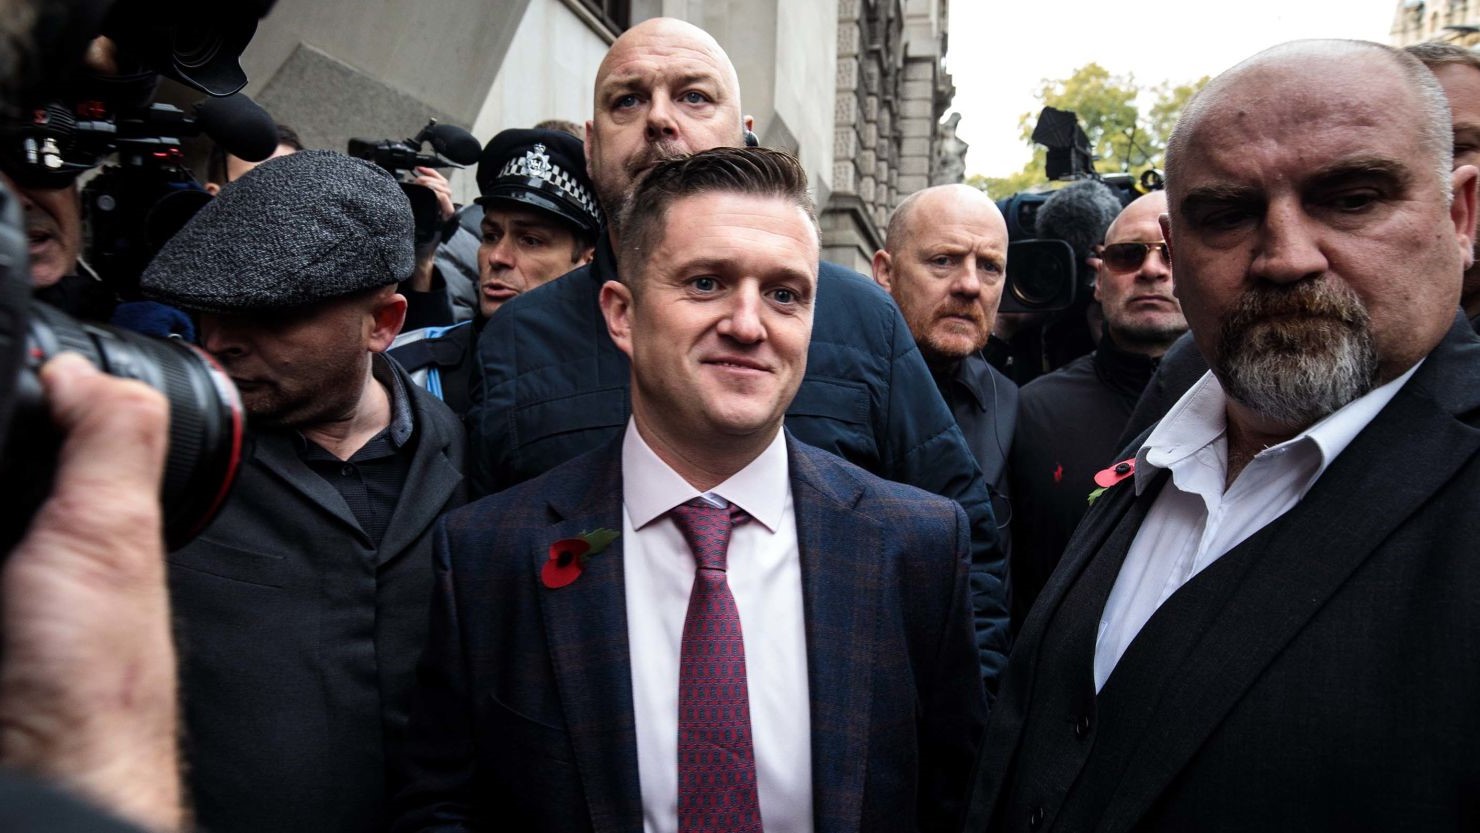 15-facts-about-tommy-robinson-activist